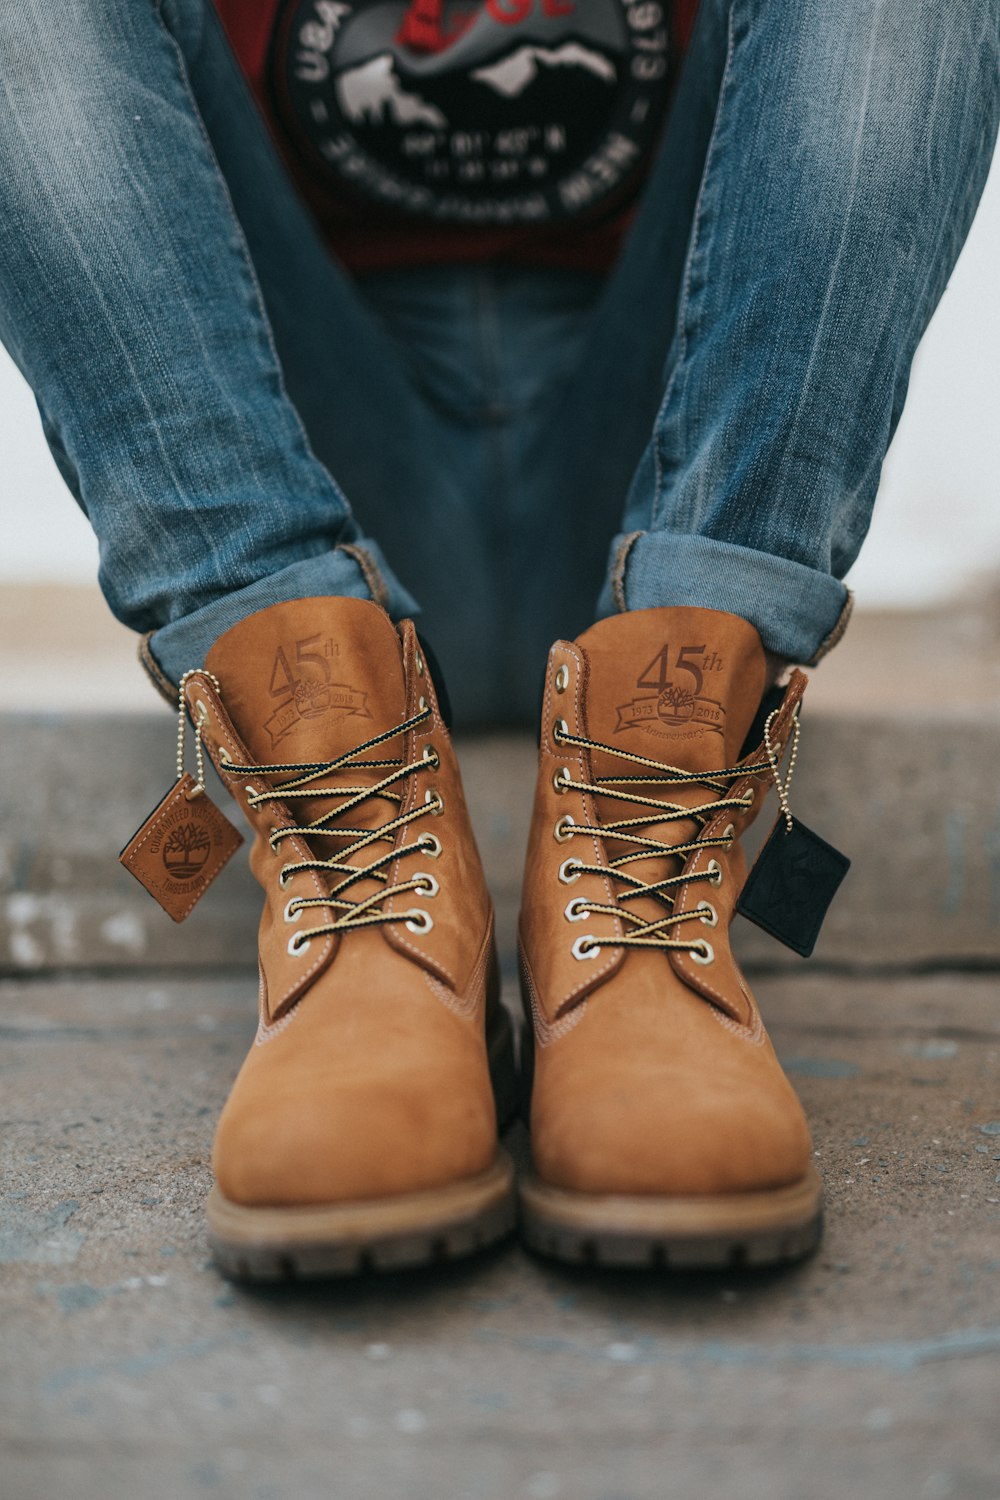 A person walks on a railway track wearing a pair of yellow Timberland boots  photo – Free Boots Image on Unsplash